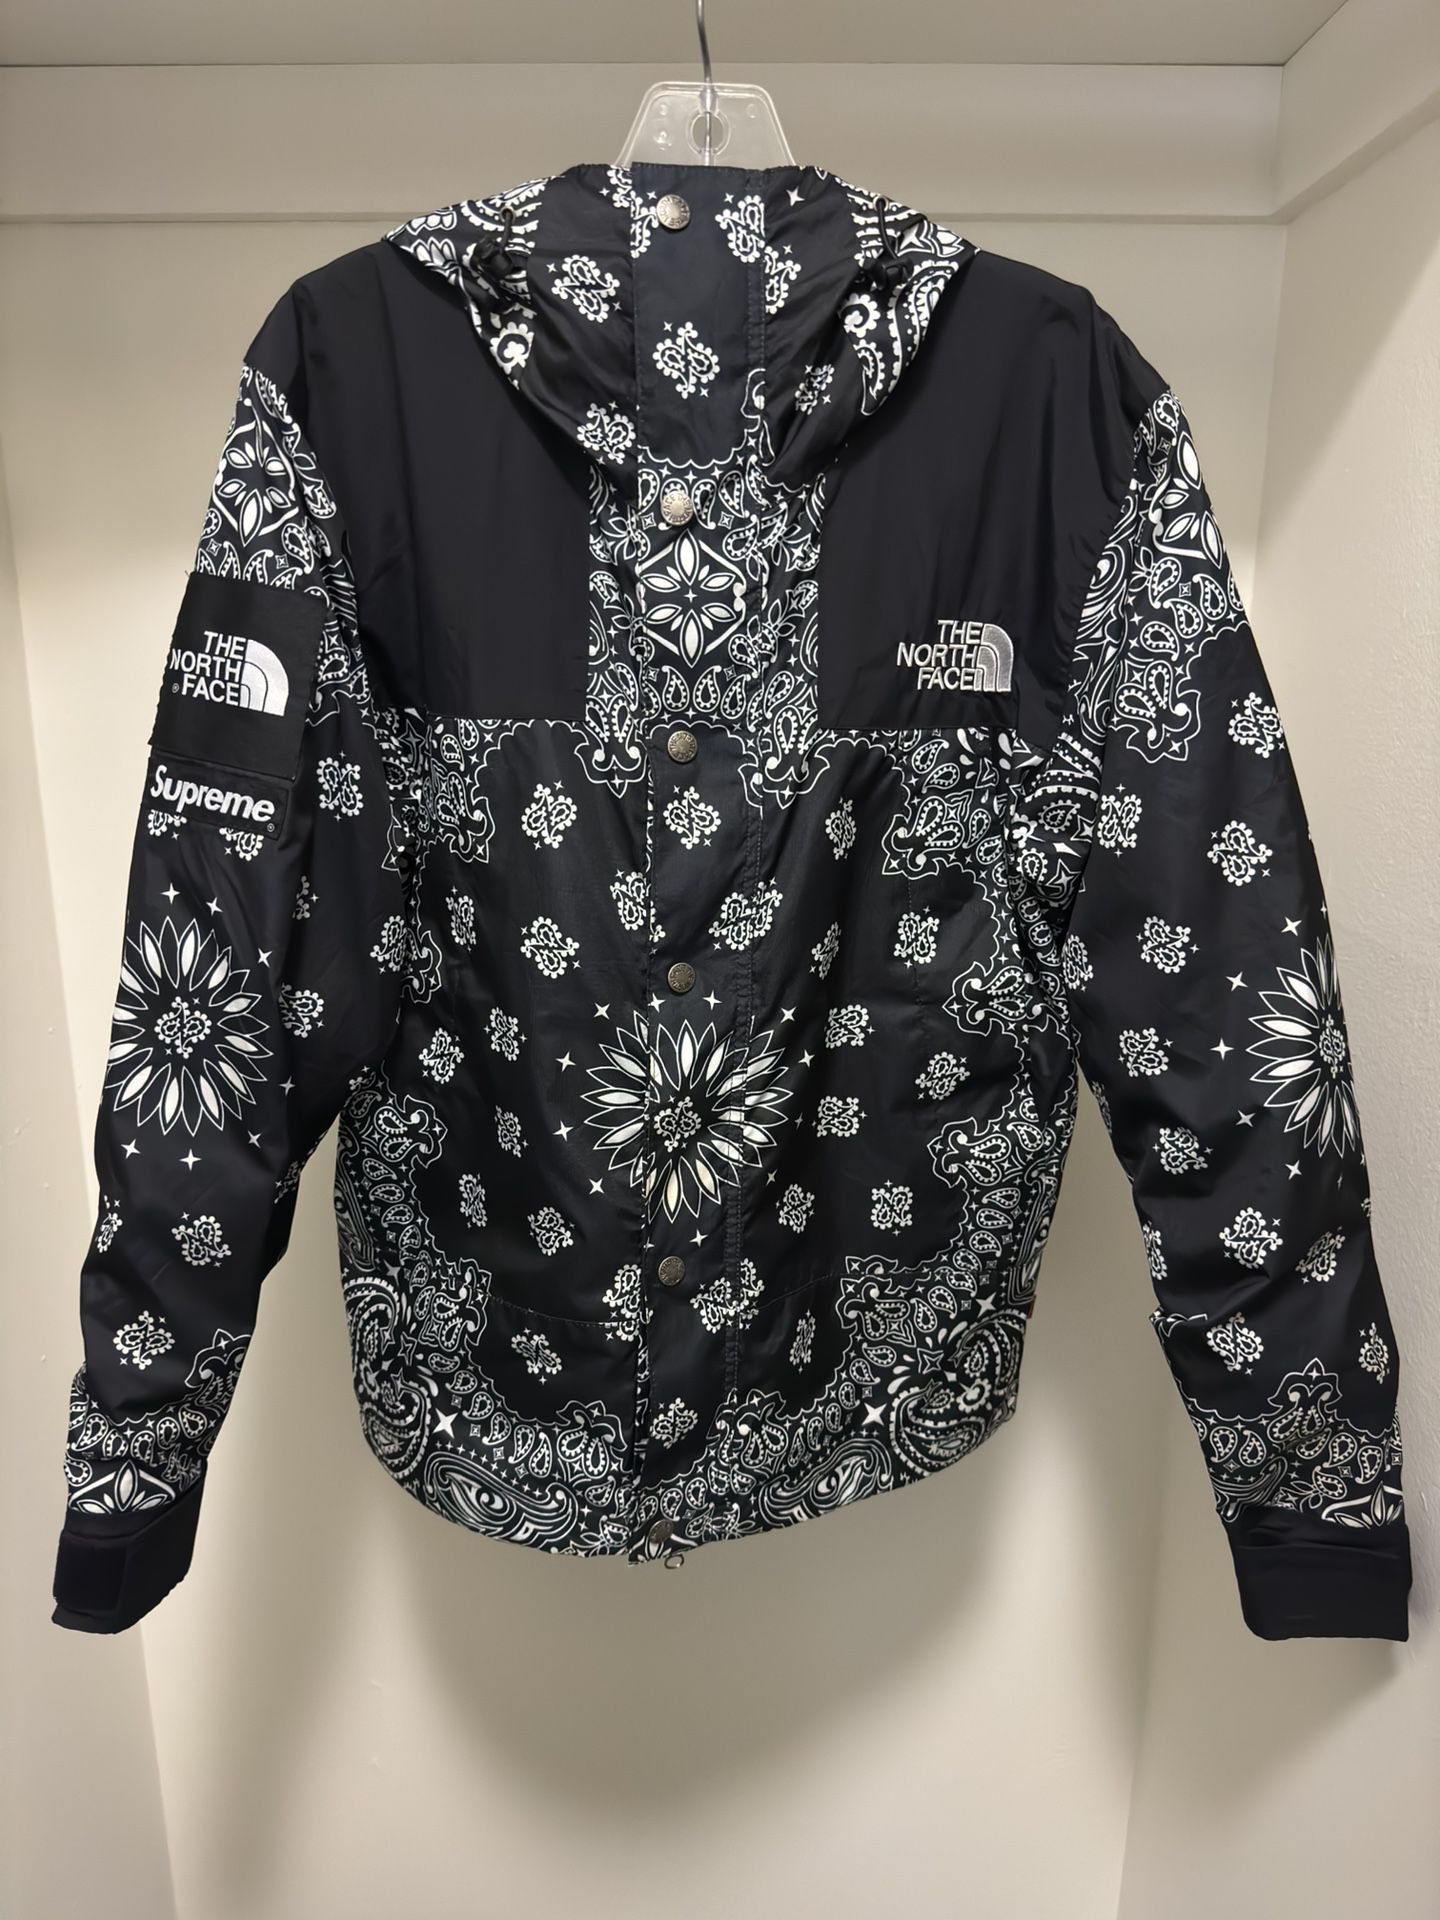 Supreme The North face Bandana Mountain Jacket in Sz Small